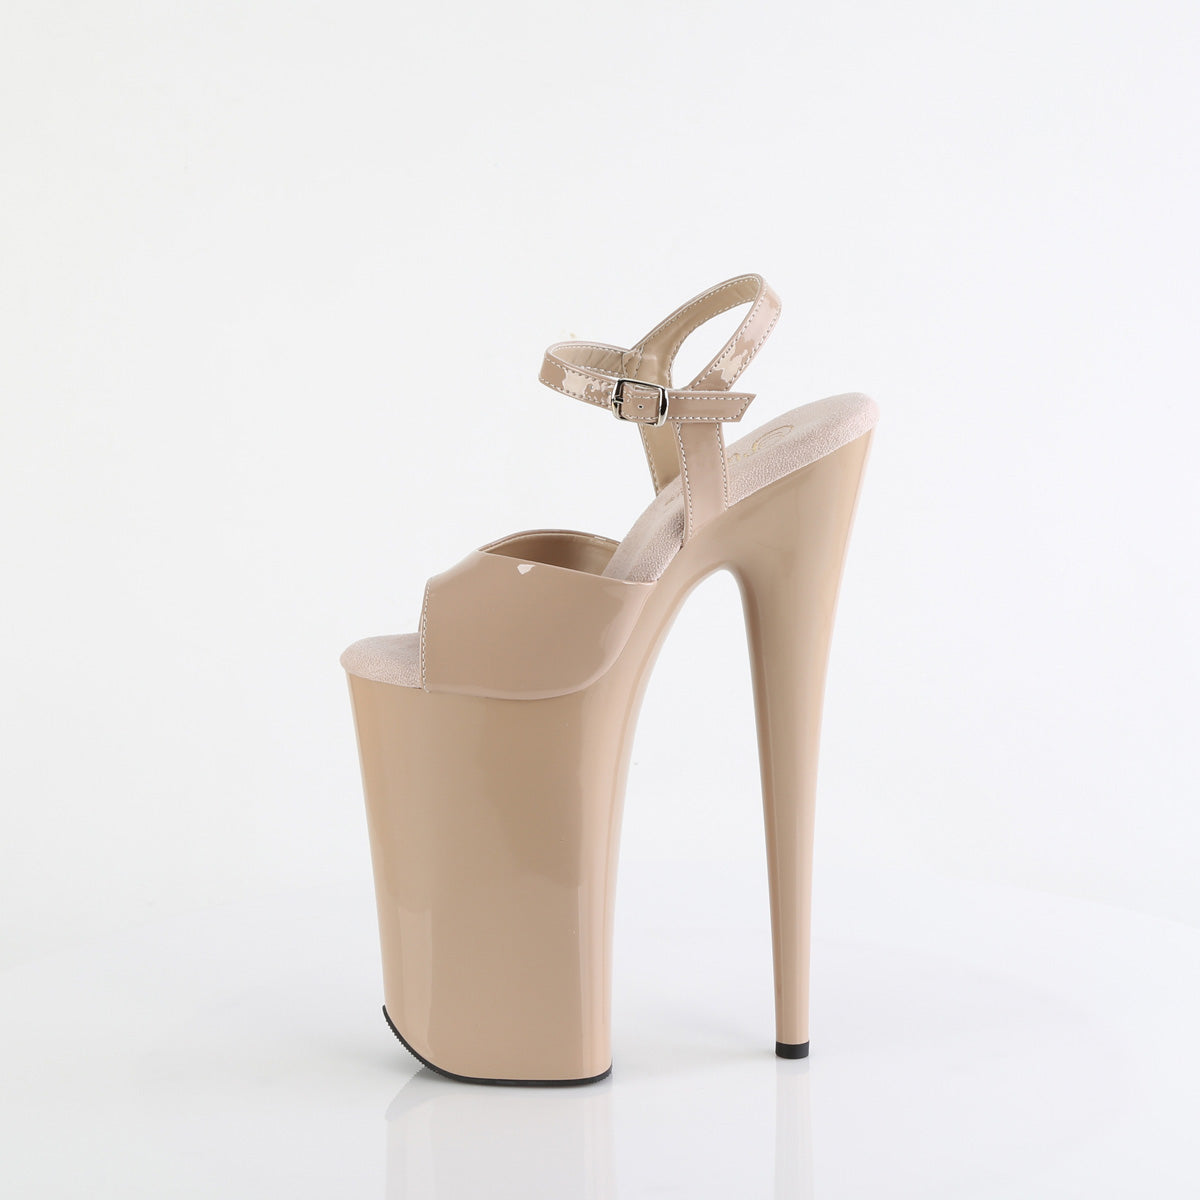 BEYOND-009 Pleaser Nude Patent/Nude Platform Shoes [Extreme High Heels]